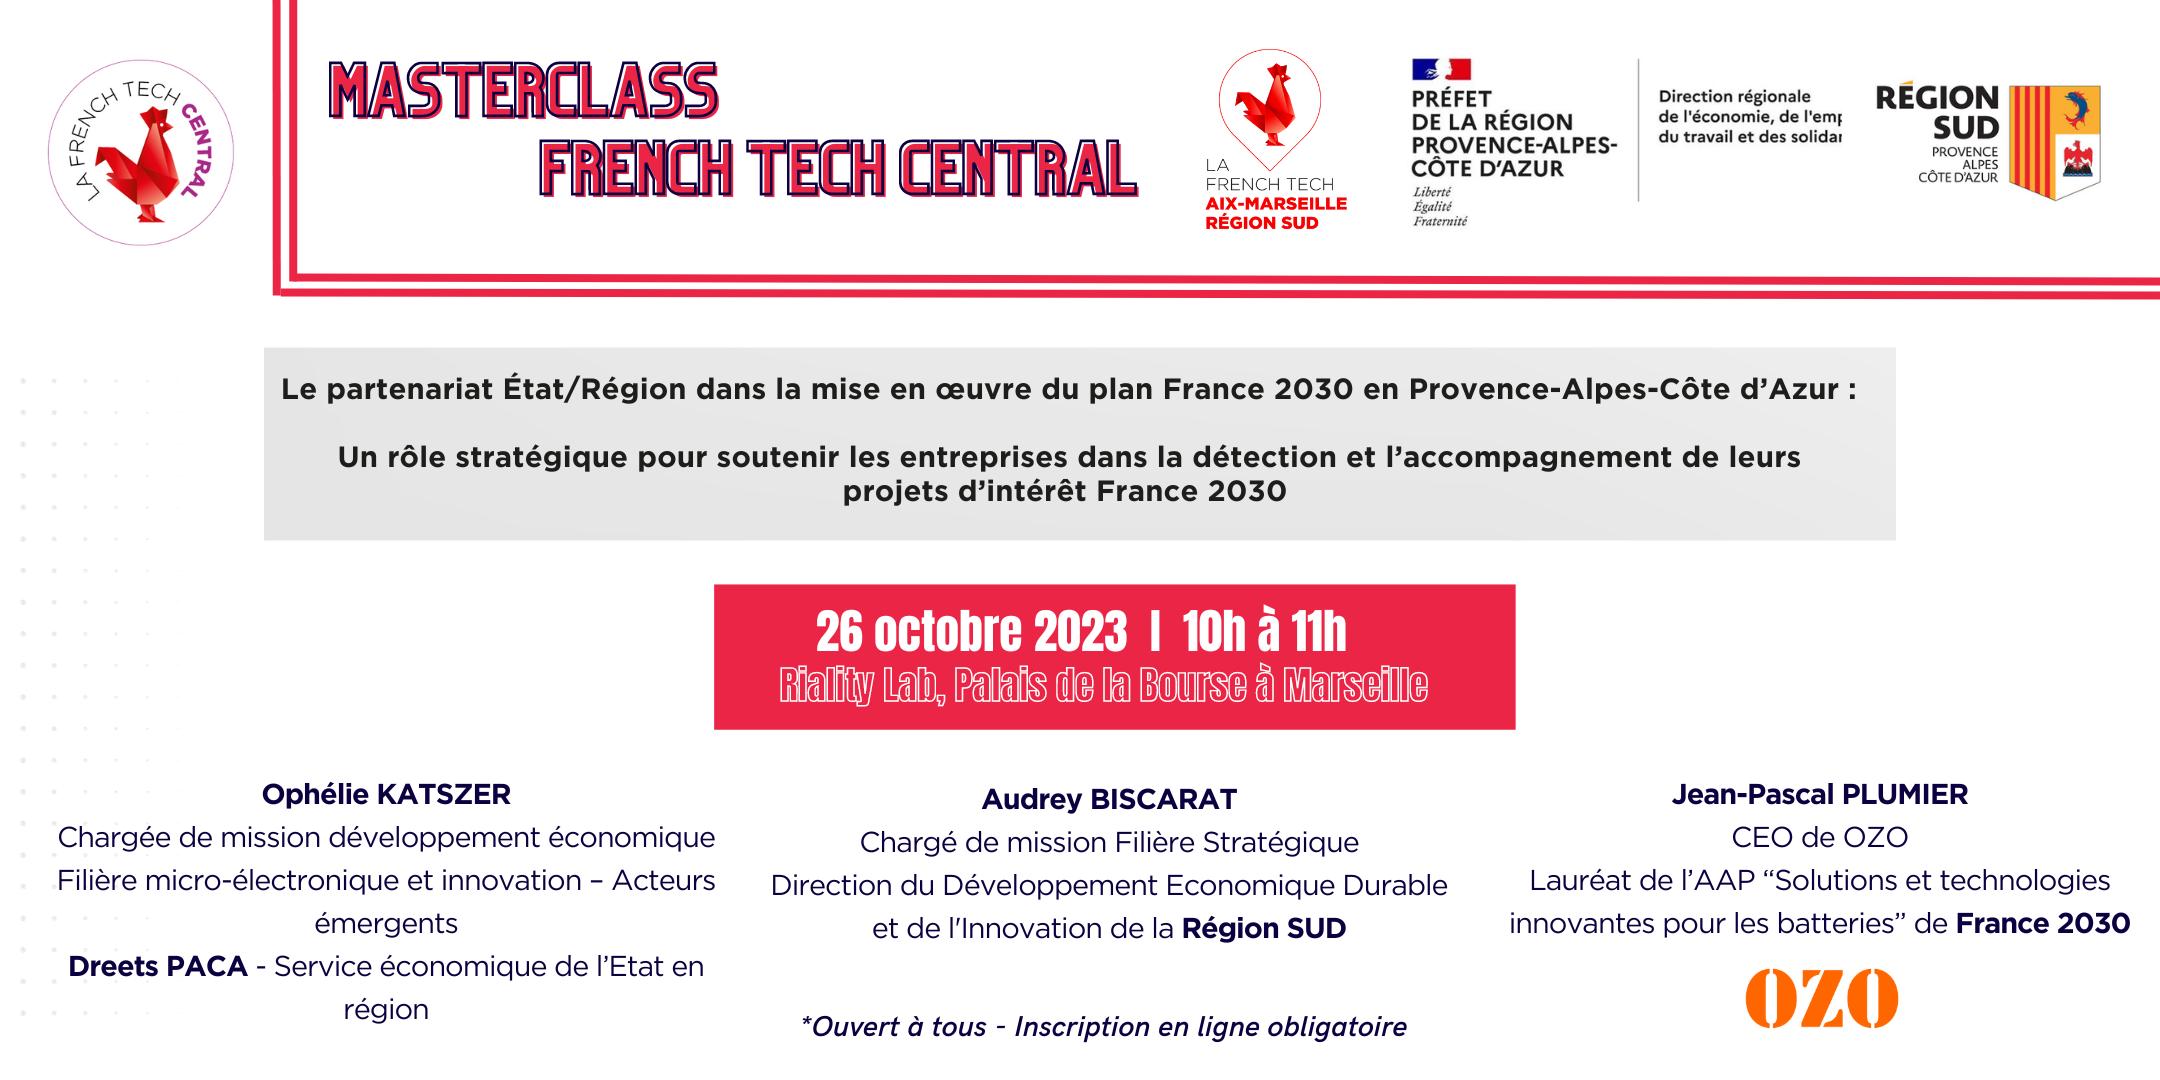 Masterclass French Tech Central – DREETS